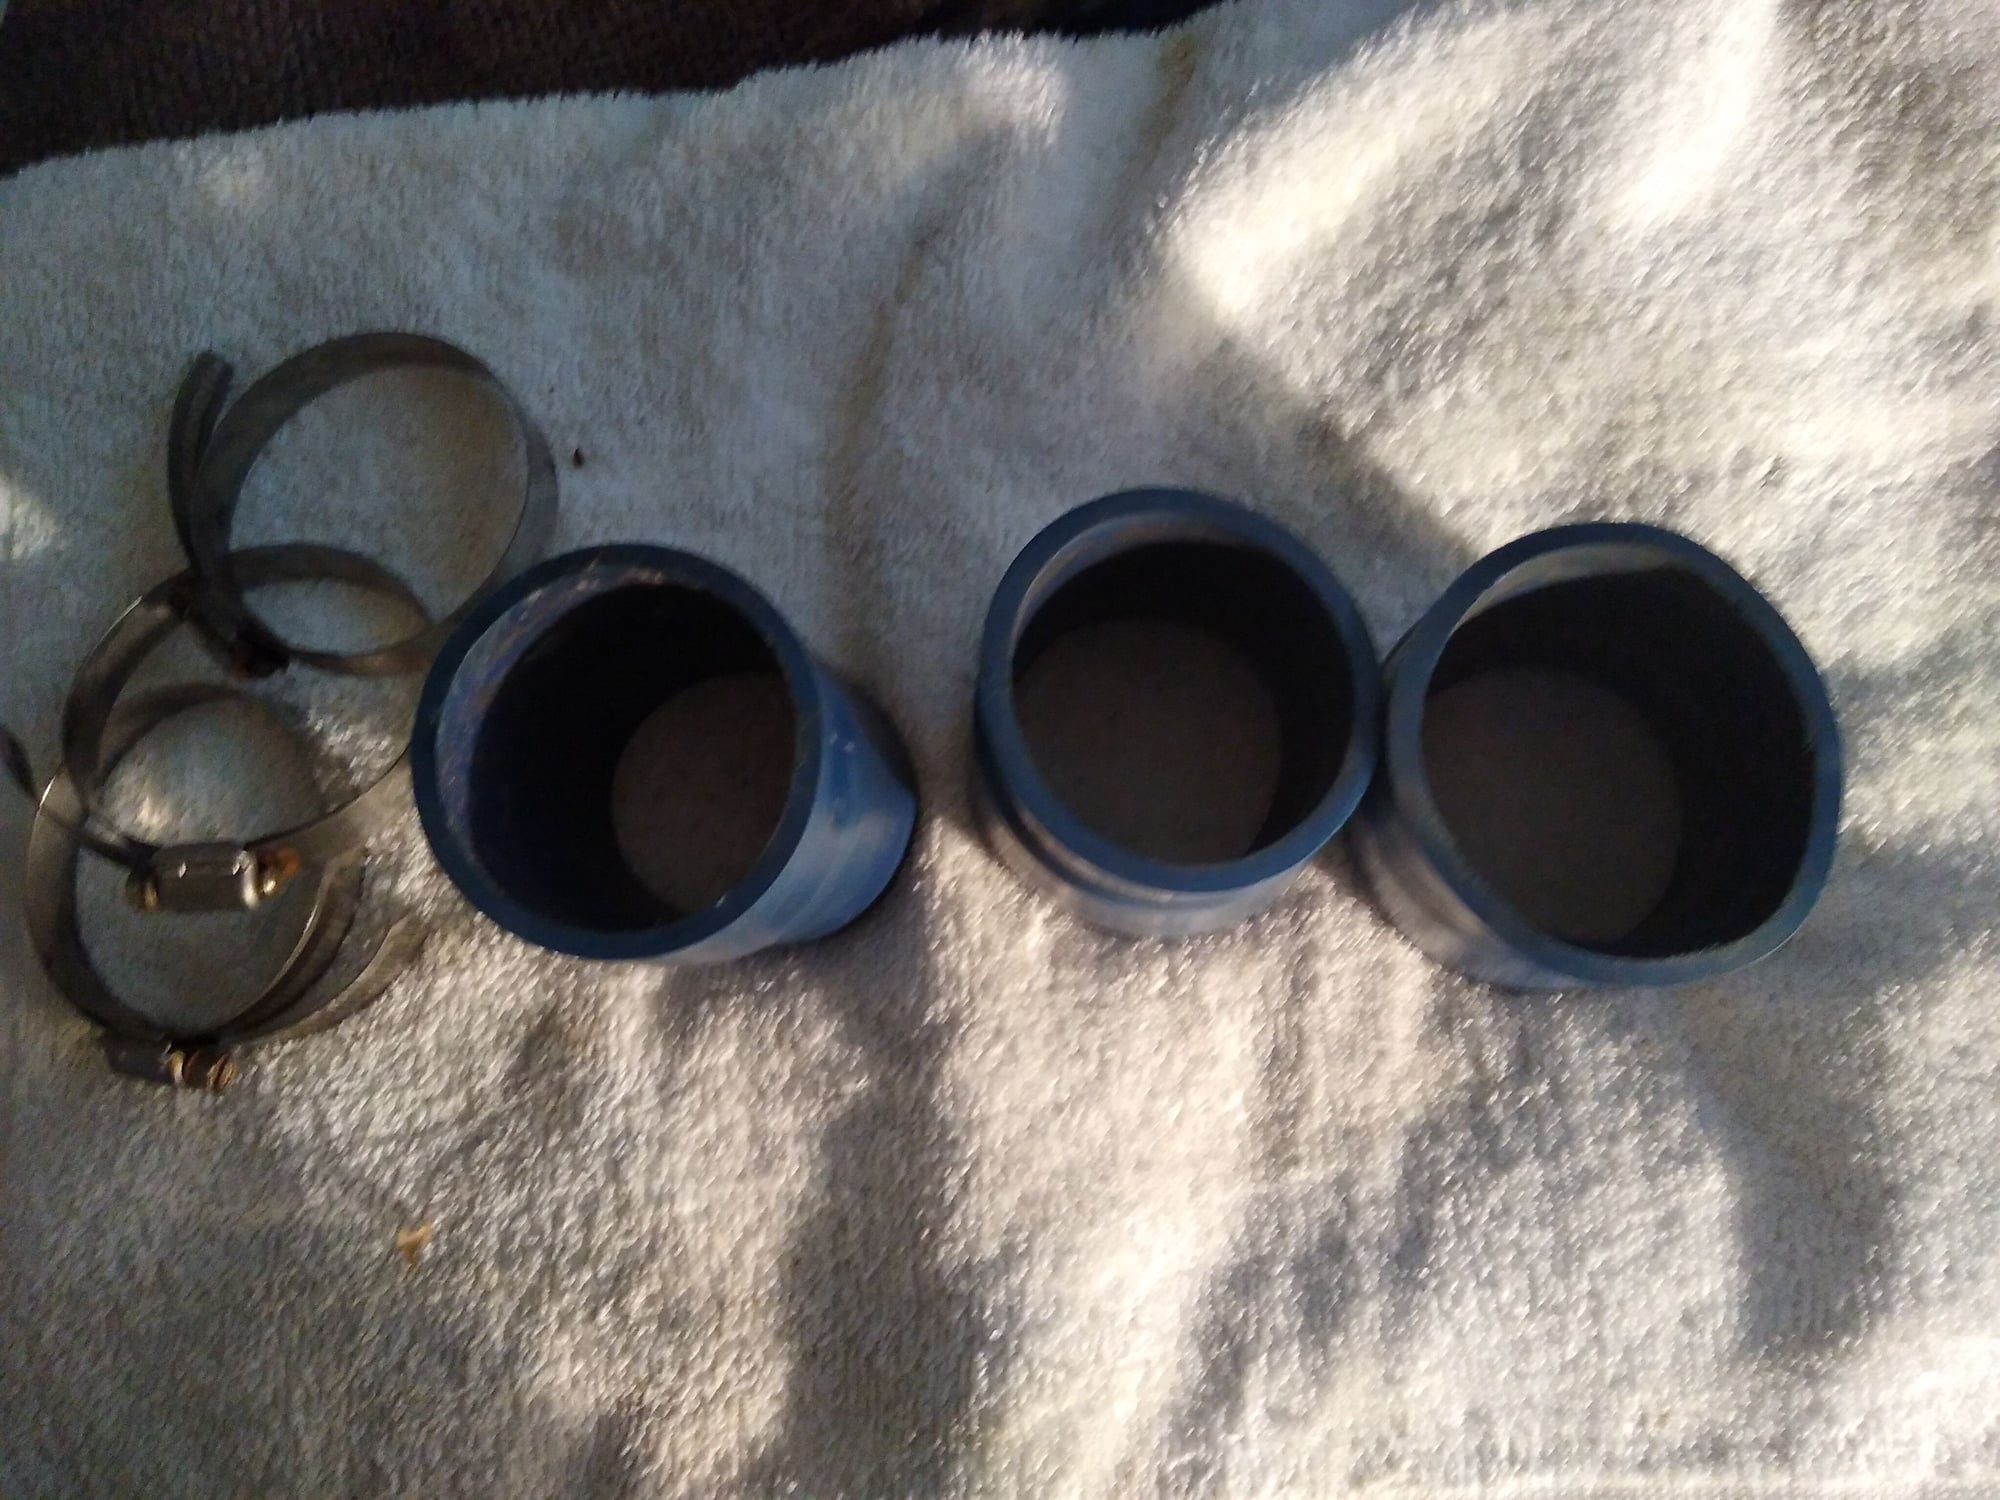 Miscellaneous - Aftermarket Silicone Couplers - Used - 1992 to 1995 Mazda RX-7 - San Jose, CA 95121, United States